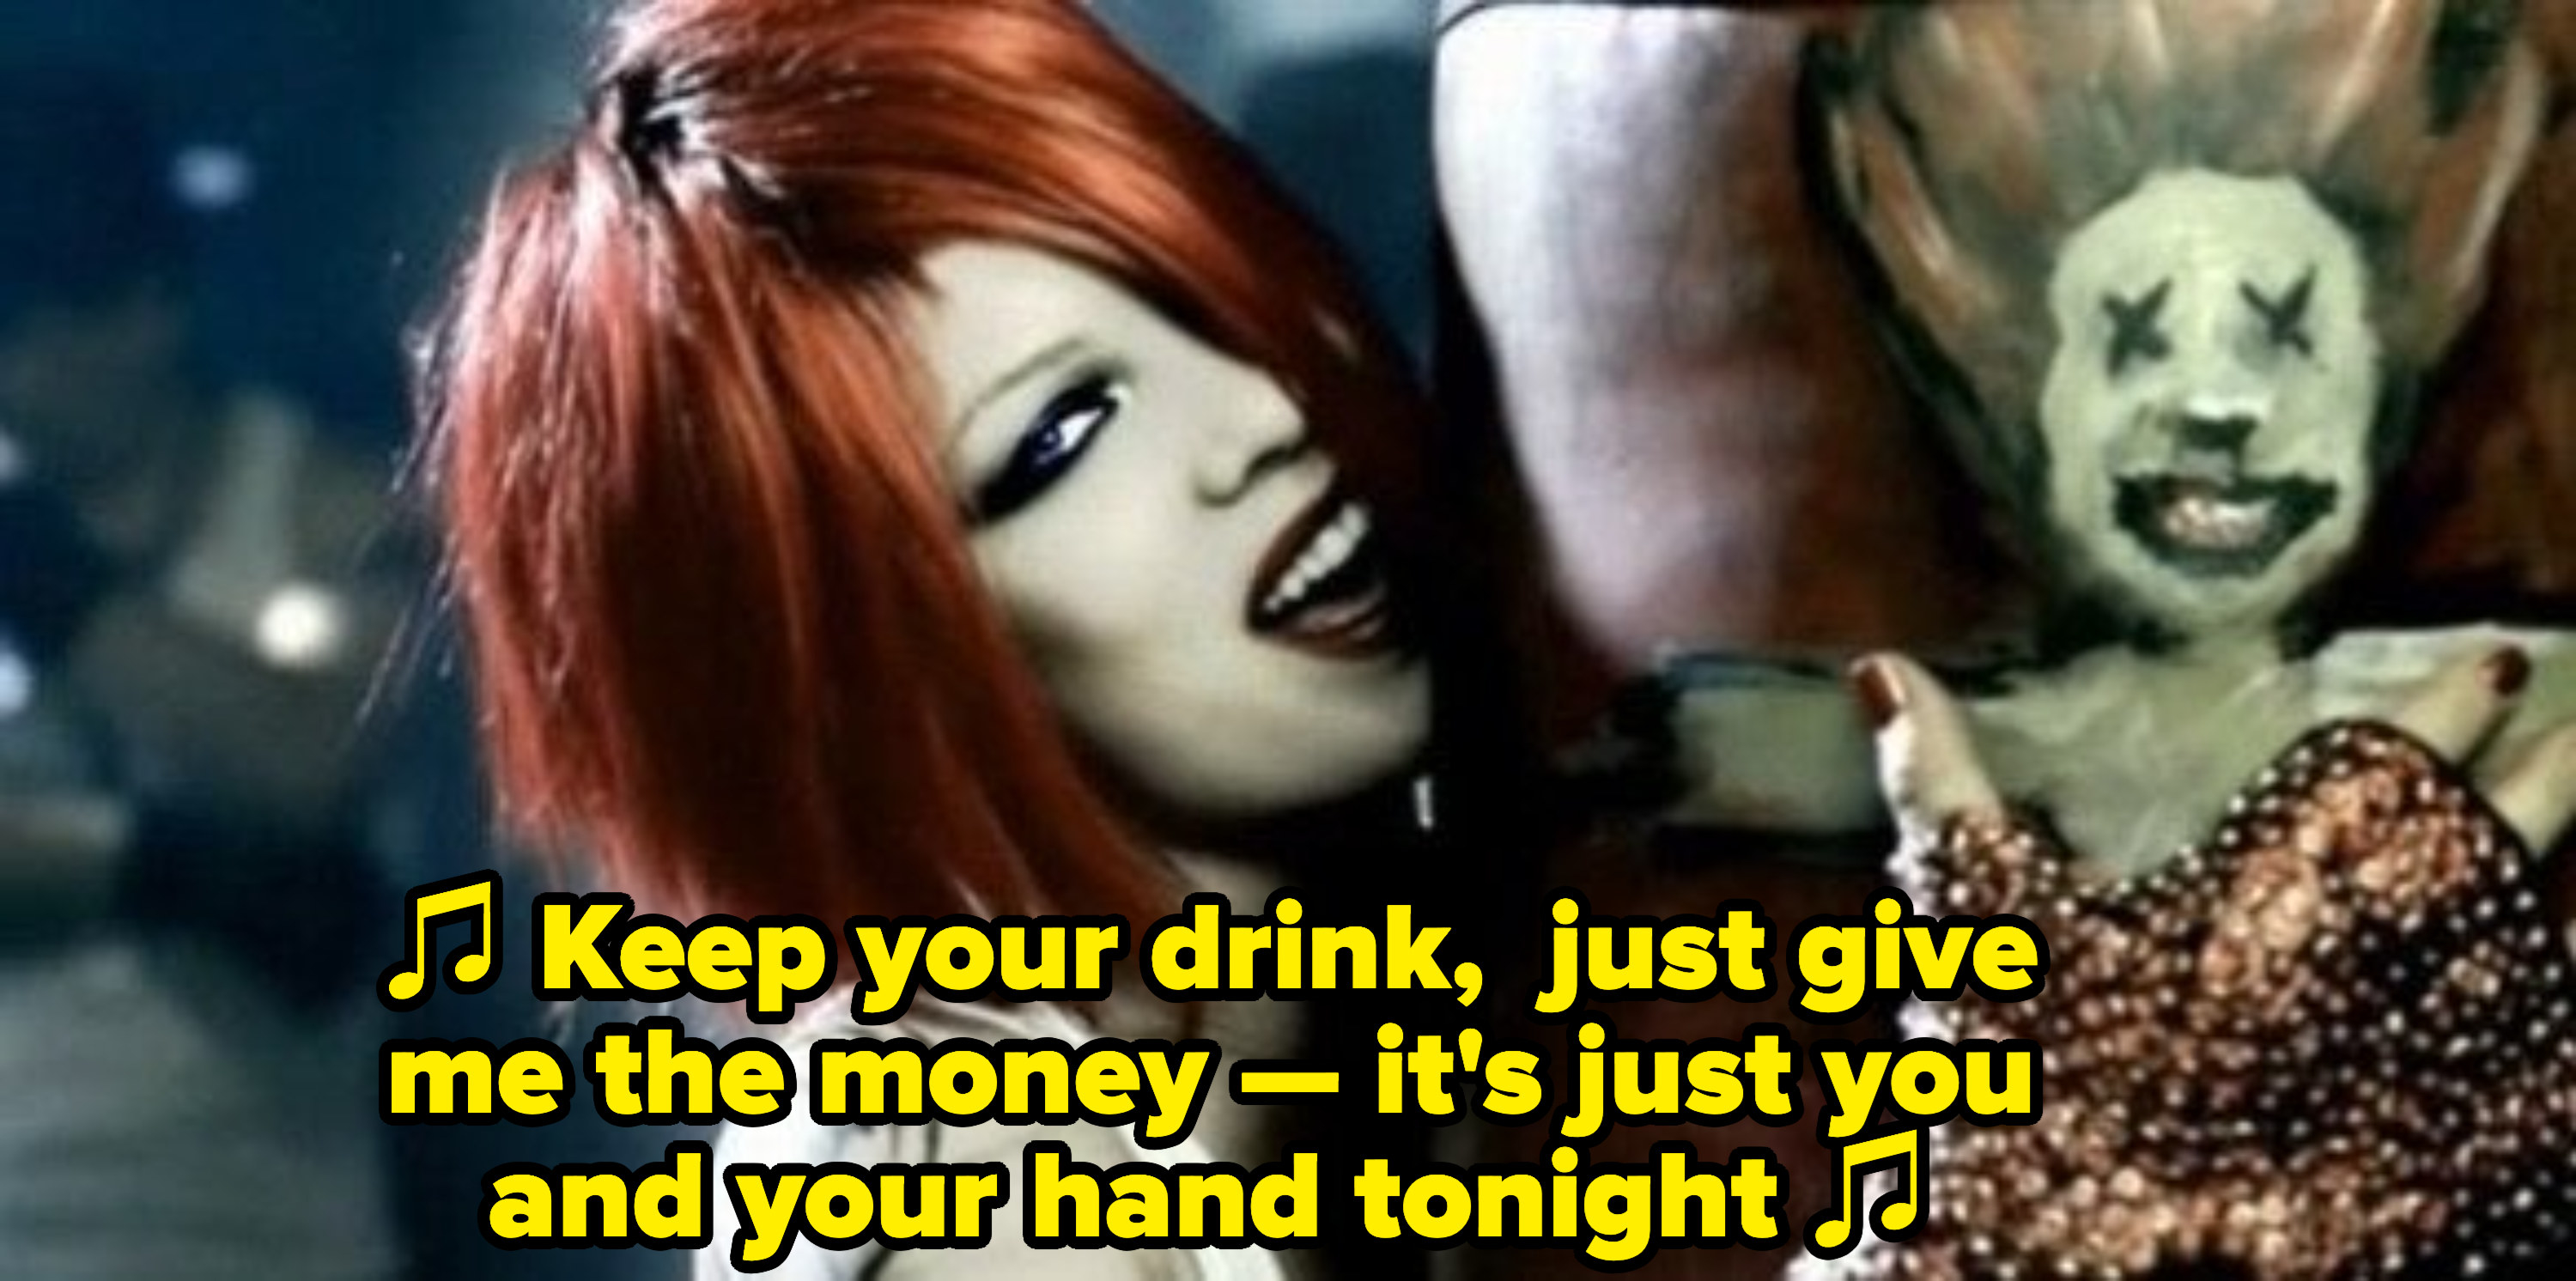 Pink singing: &quot;Keep your drink, just give me the money -- it&#x27;s just you and your hand tonight&quot;